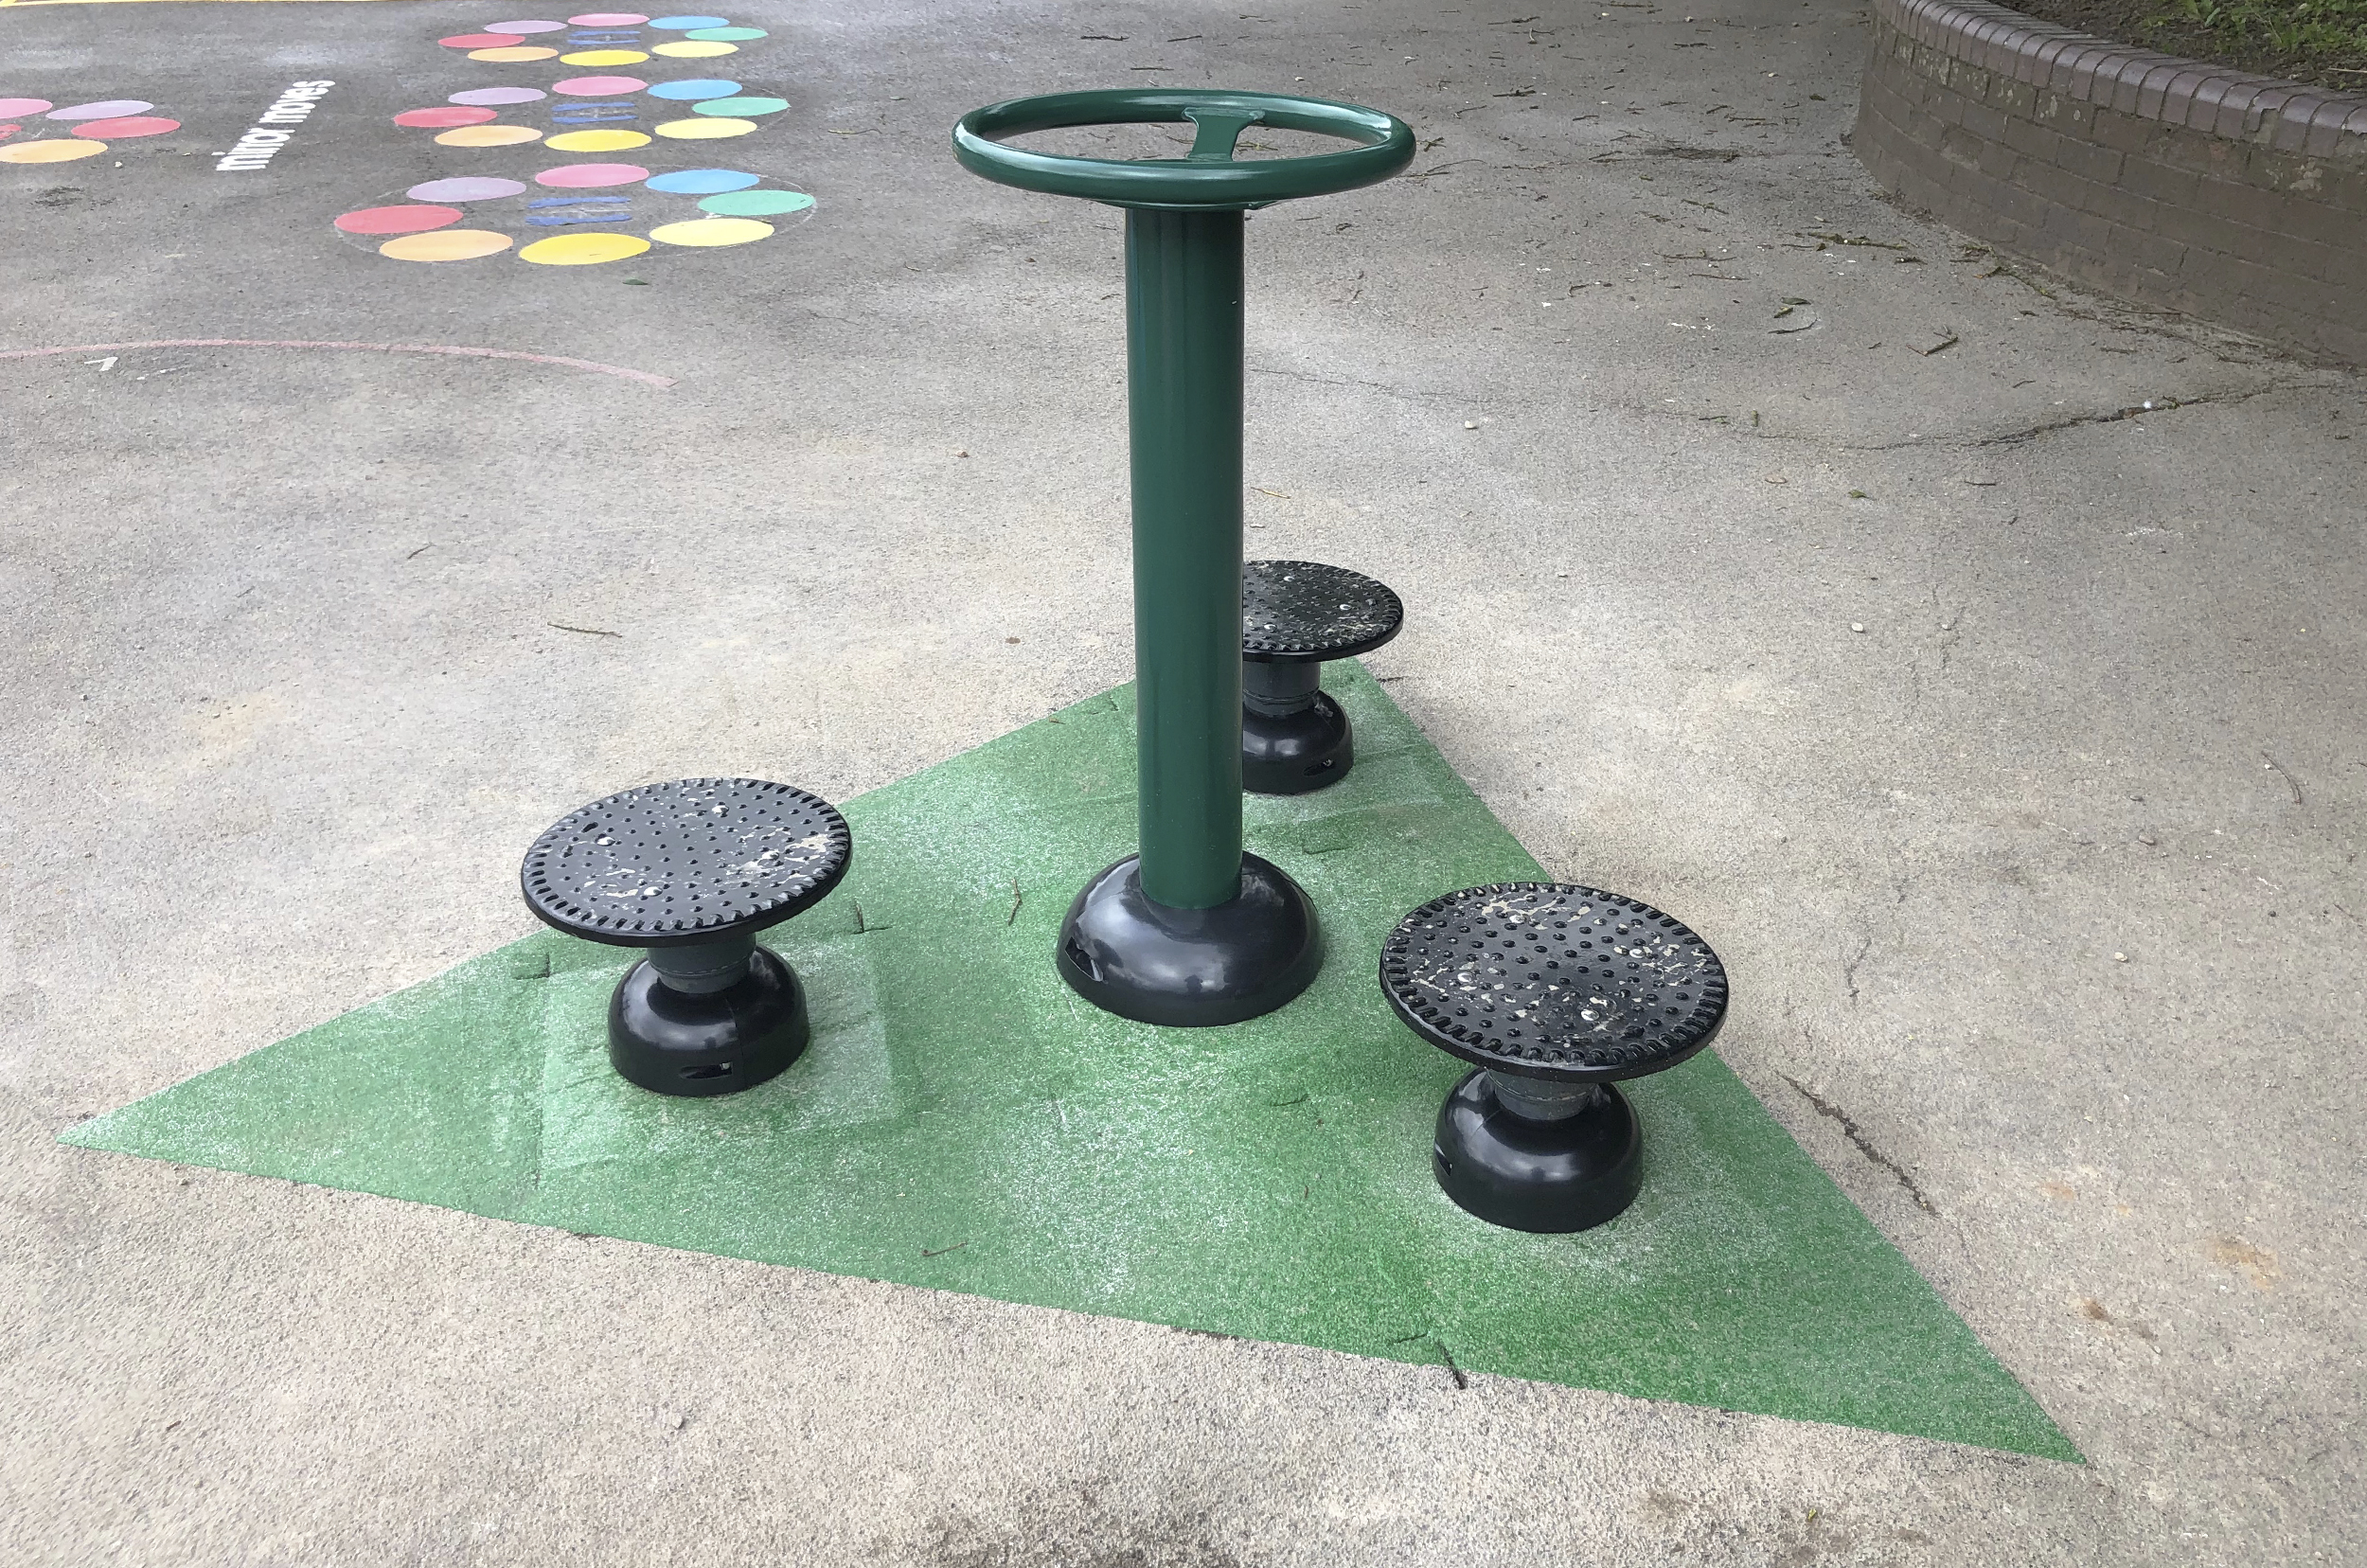 the central post has a waist height circular handle, three outer ground level disc provide a place to stand and rate to twist the waist whilst holding the handle. located on a tarmac playground with a green coloured triangle